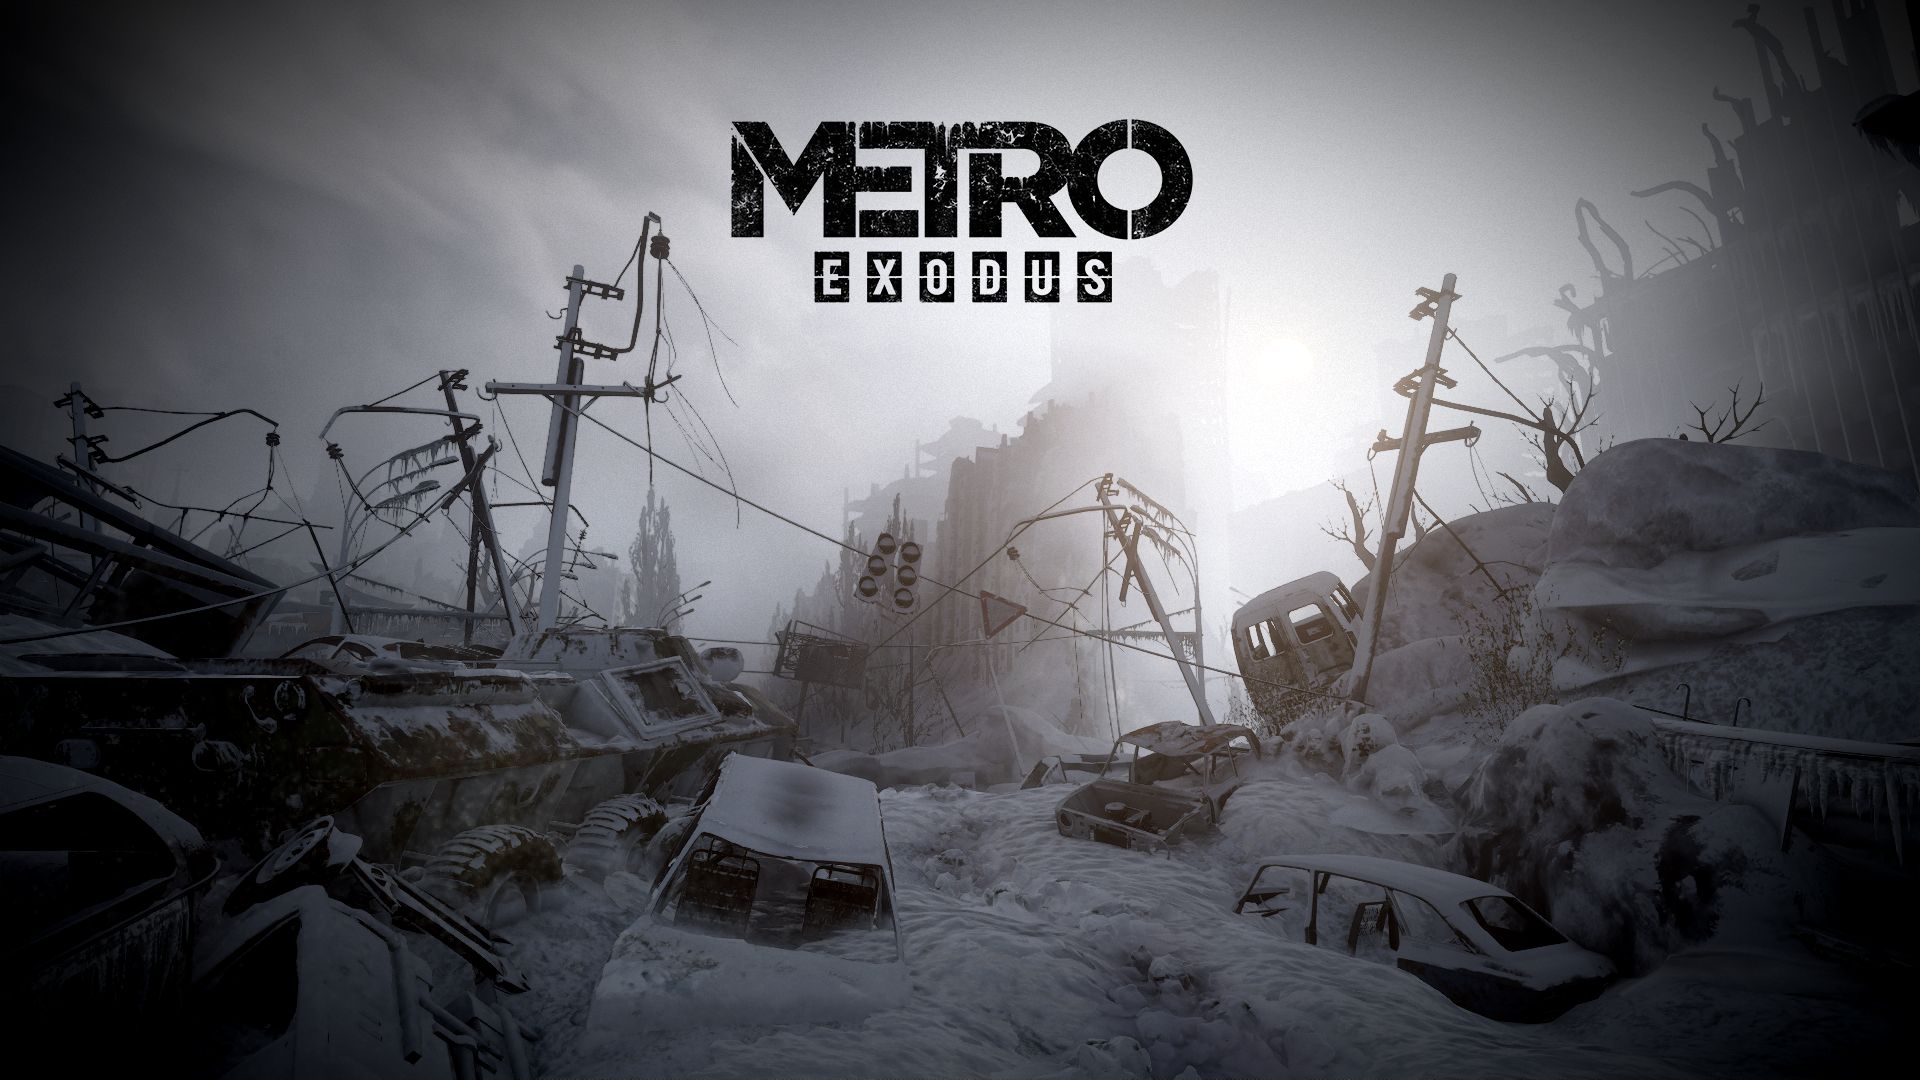 Metro Exodus wallpapers for desktop, download free Metro Exodus pictures  and backgrounds for PC 